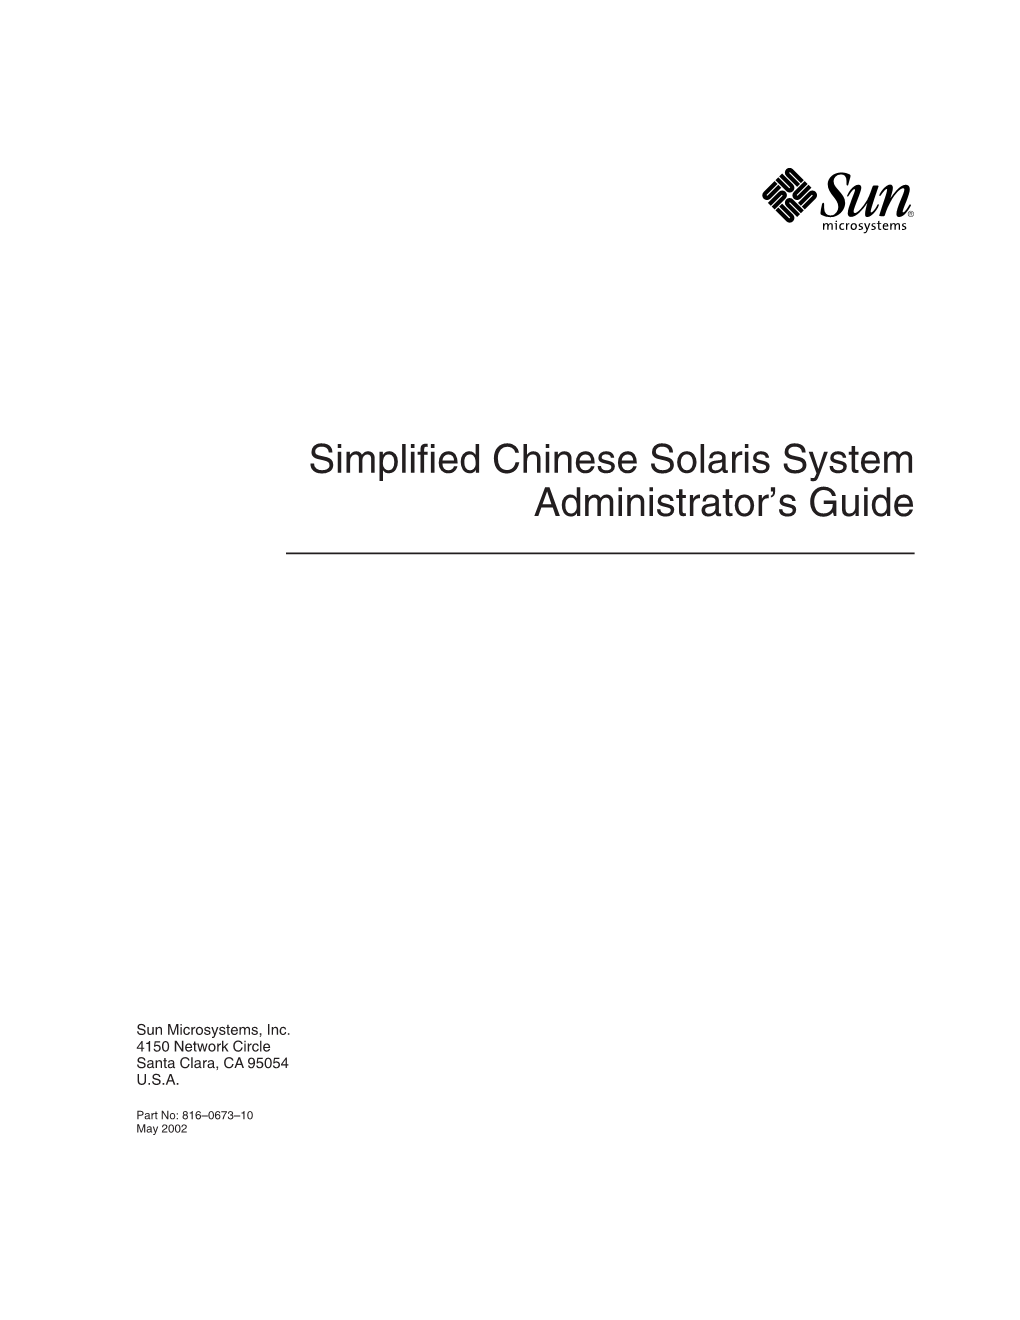 Simplified Chinese Solaris System Administrator's Guide